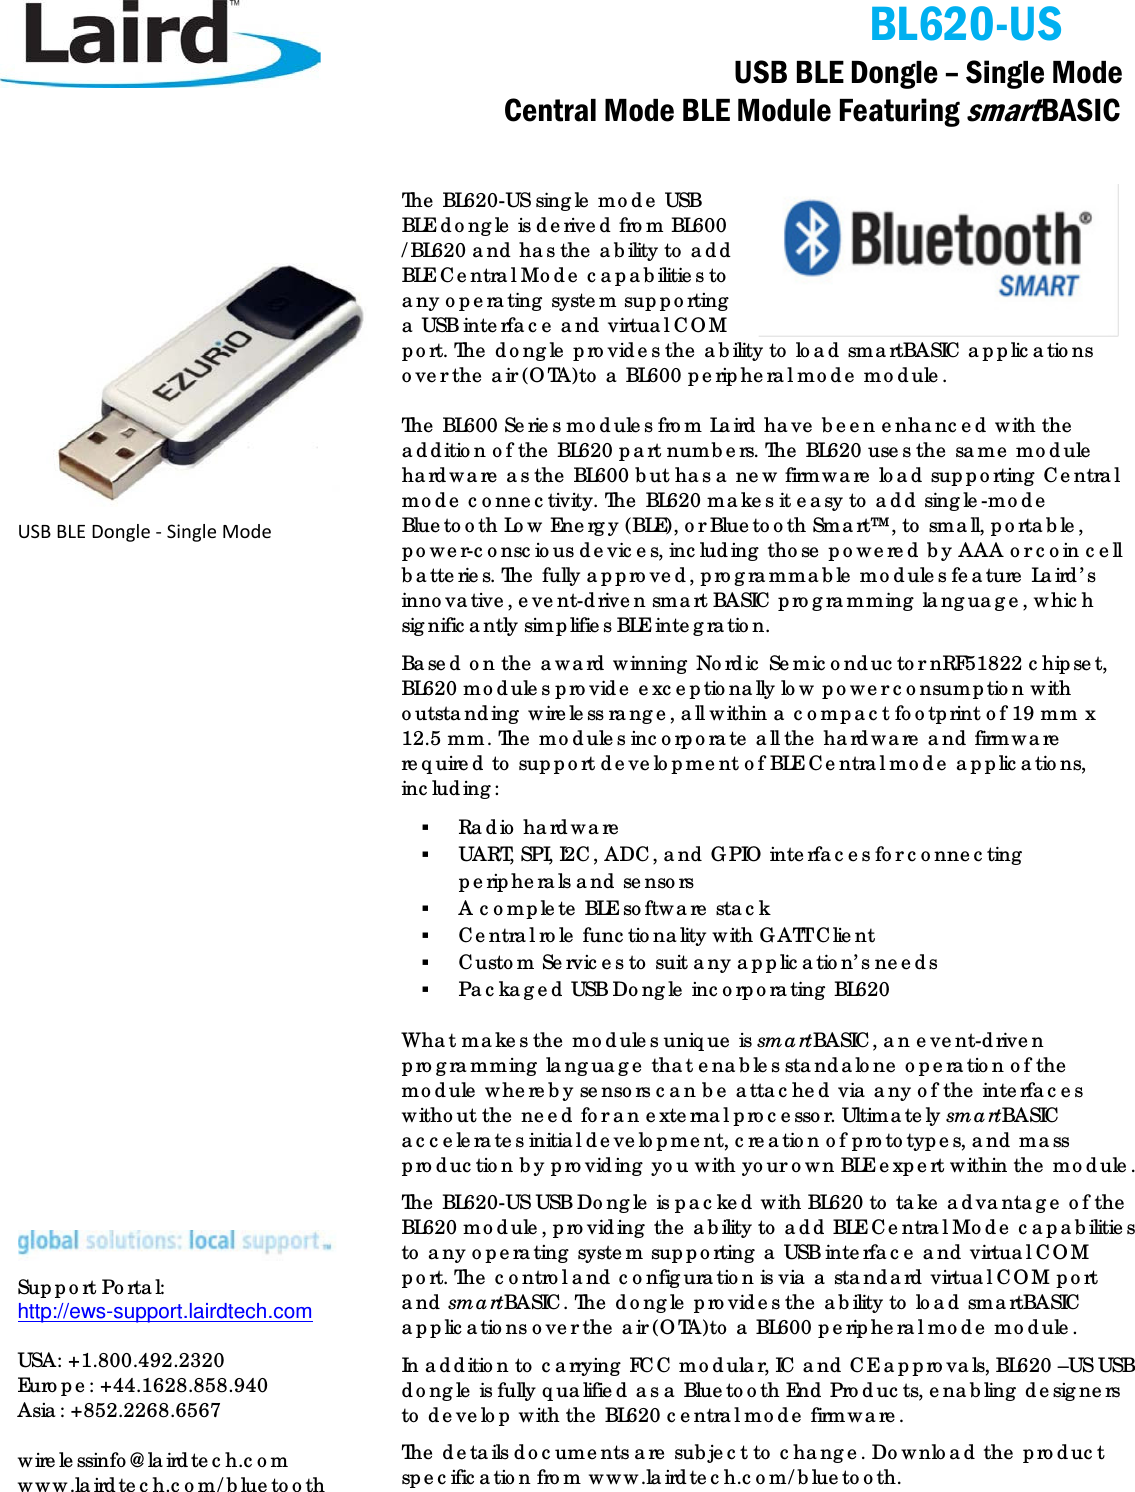                                            BL620-US   USB BLE Dongle – Single Mode              Central Mode BLE Module Featuring smart BASIC                   USB BLE Dongle - Single Mode                           Support Portal: http://ews-support.lairdtech.com   USA: +1.800.492.2320 Europe: +44.1628.858.940 Asia: +852.2268.6567  wirelessinfo@lairdtech.com www.lairdtech.com/bluetooth The BL620-US single mode USB BLE dongle is derived from BL600 /BL620 and has the ability to add BLE Central Mode capabilities to any operating system supporting a USB interface and virtual COM port. The dongle provides the ability to load smartBASIC applications over the air (OTA)to a BL600 peripheral mode module. The BL600 Series modules from Laird have been enhanced with the addition of the BL620 part numbers. The BL620 uses the same module hardware as the BL600 but has a new firmware load supporting Central mode connectivity. The BL620 makes it easy to add single-mode Bluetooth Low Energy (BLE), or Bluetooth Smart™, to small, portable, power-conscious devices, including those powered by AAA or coin cell batteries. The fully approved, programmable modules feature Laird’s innovative, event-driven smart BASIC programming language, which significantly simplifies BLE integration. Based on the award winning Nordic Semiconductor nRF51822 chipset, BL620 modules provide exceptionally low power consumption with outstanding wireless range, all within a compact footprint of 19 mm x 12.5 mm. The modules incorporate all the hardware and firmware required to support development of BLE Central mode applications, including:   Radio hardware  UART, SPI, I2C, ADC, and GPIO interfaces for connecting peripherals and sensors  A complete BLE software stack  Central role functionality with GATT Client   Custom Services to suit any application’s needs   Packaged USB Dongle incorporating BL620 What makes the modules unique is smartBASIC, an event-driven programming language that enables standalone operation of the module whereby sensors can be attached via any of the interfaces without the need for an external processor. Ultimately smartBASIC accelerates initial development, creation of prototypes, and mass production by providing you with your own BLE expert within the module.  The BL620-US USB Dongle is packed with BL620 to take advantage of the BL620 module, providing the ability to add BLE Central Mode capabilities to any operating system supporting a USB interface and virtual COM port. The control and configuration is via a standard virtual COM port and smartBASIC. The dongle provides the ability to load smartBASIC applications over the air (OTA)to a BL600 peripheral mode module. In addition to carrying FCC modular, IC and CE approvals, BL620 –US USB dongle is fully qualified as a Bluetooth End Products, enabling designers to develop with the BL620 central mode firmware. The details documents are subject to change. Download the product specification from www.lairdtech.com/bluetooth. 